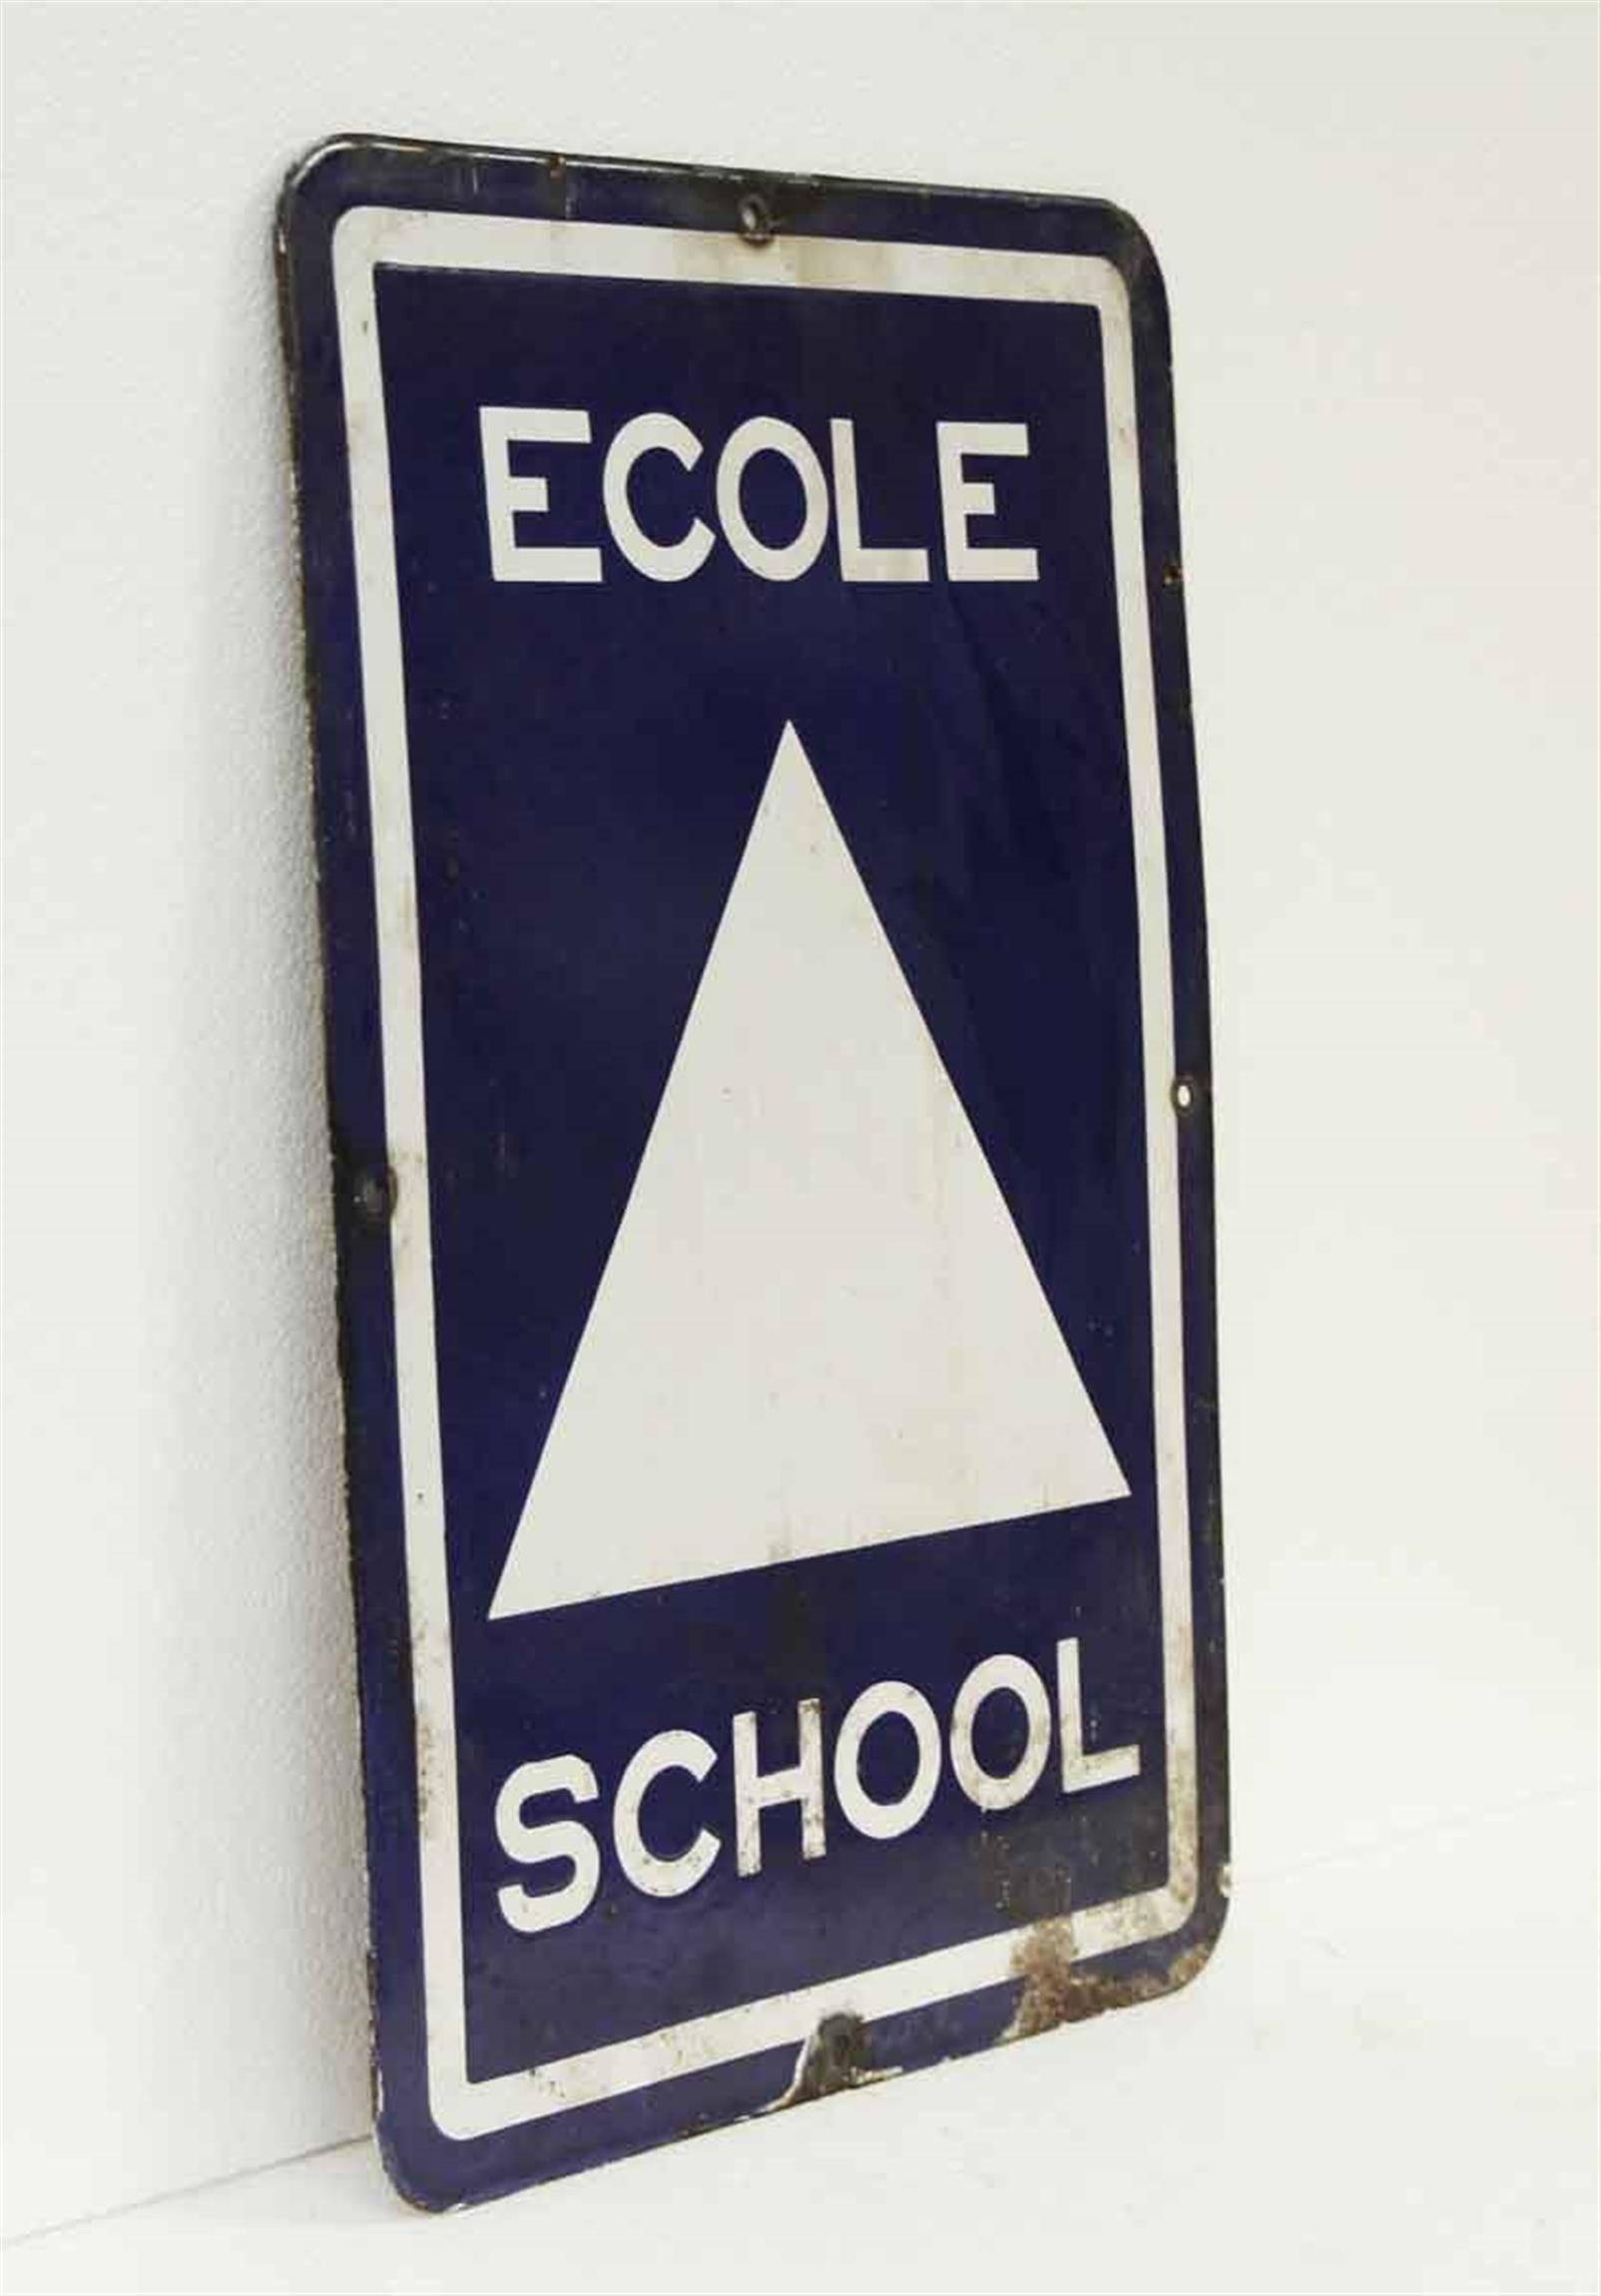 1970s blue and white metal Ecole school sign. This can be seen at our 2420 Broadway location on the upper west side in Manhattan.